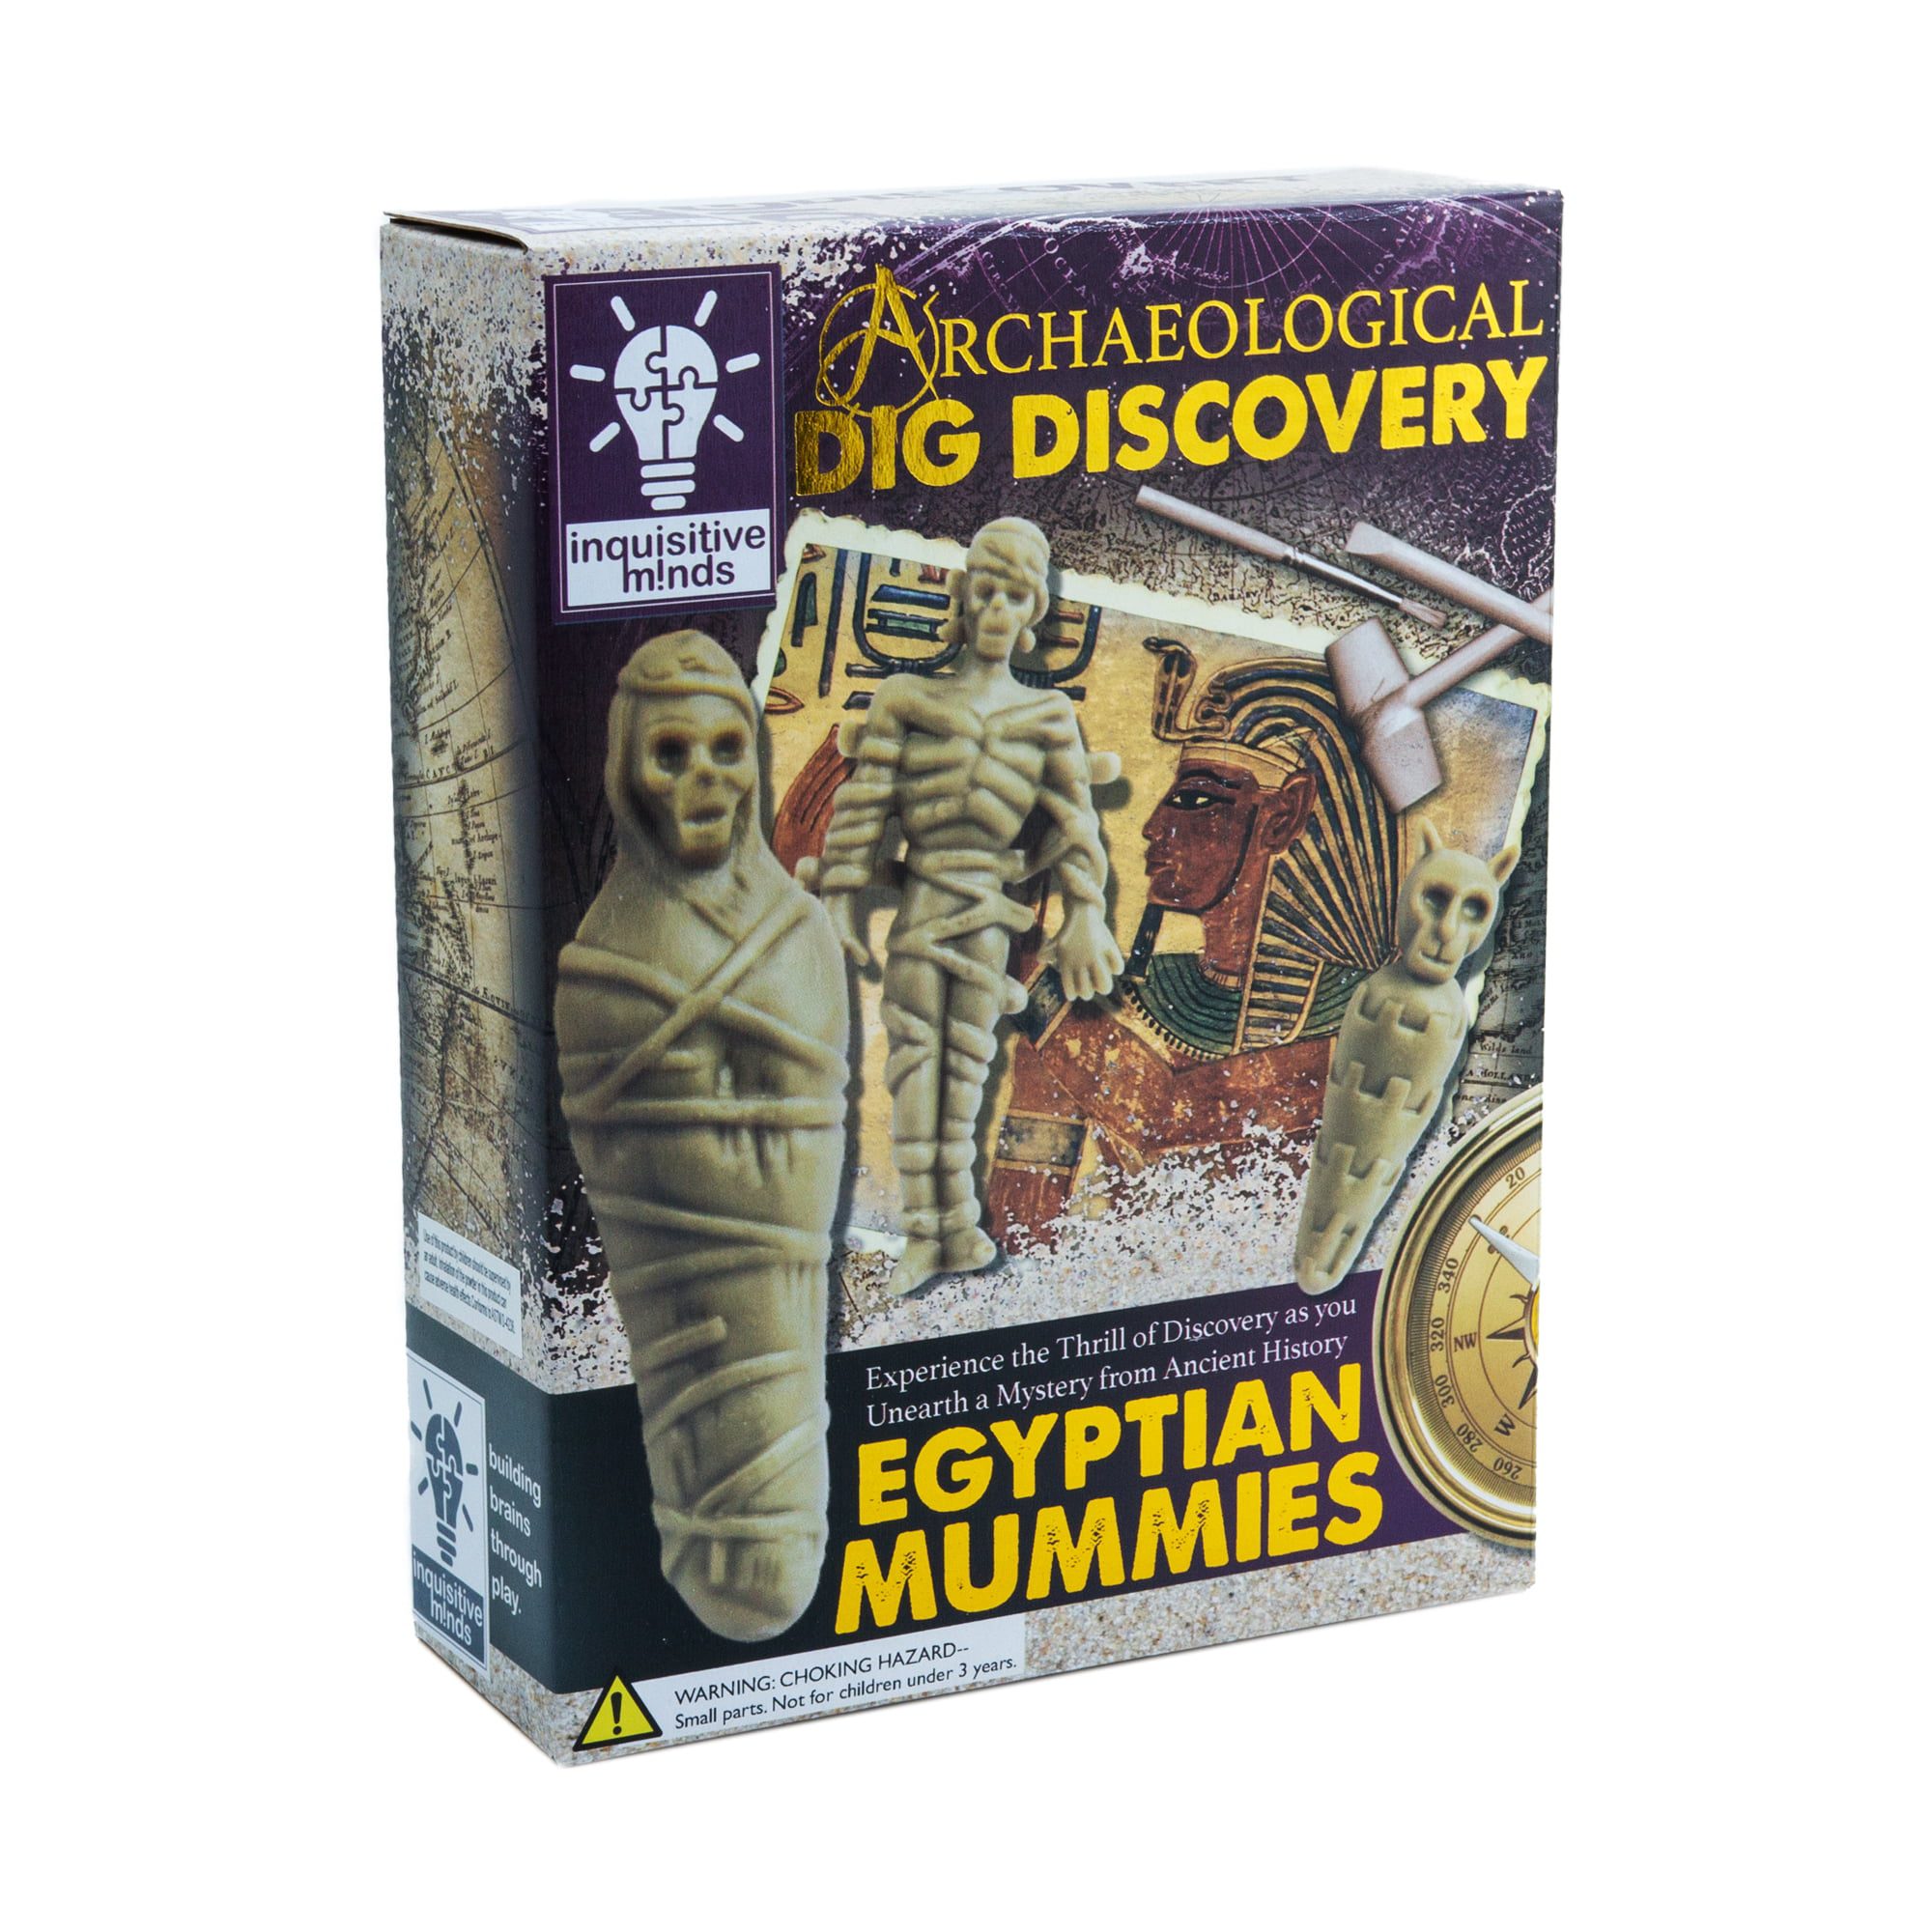 EGYPTIAN MUMMY ARCHAEOLOGY KIT SC202 DIGGING EXCAVATION SCIENCE DISCOVERY SET 